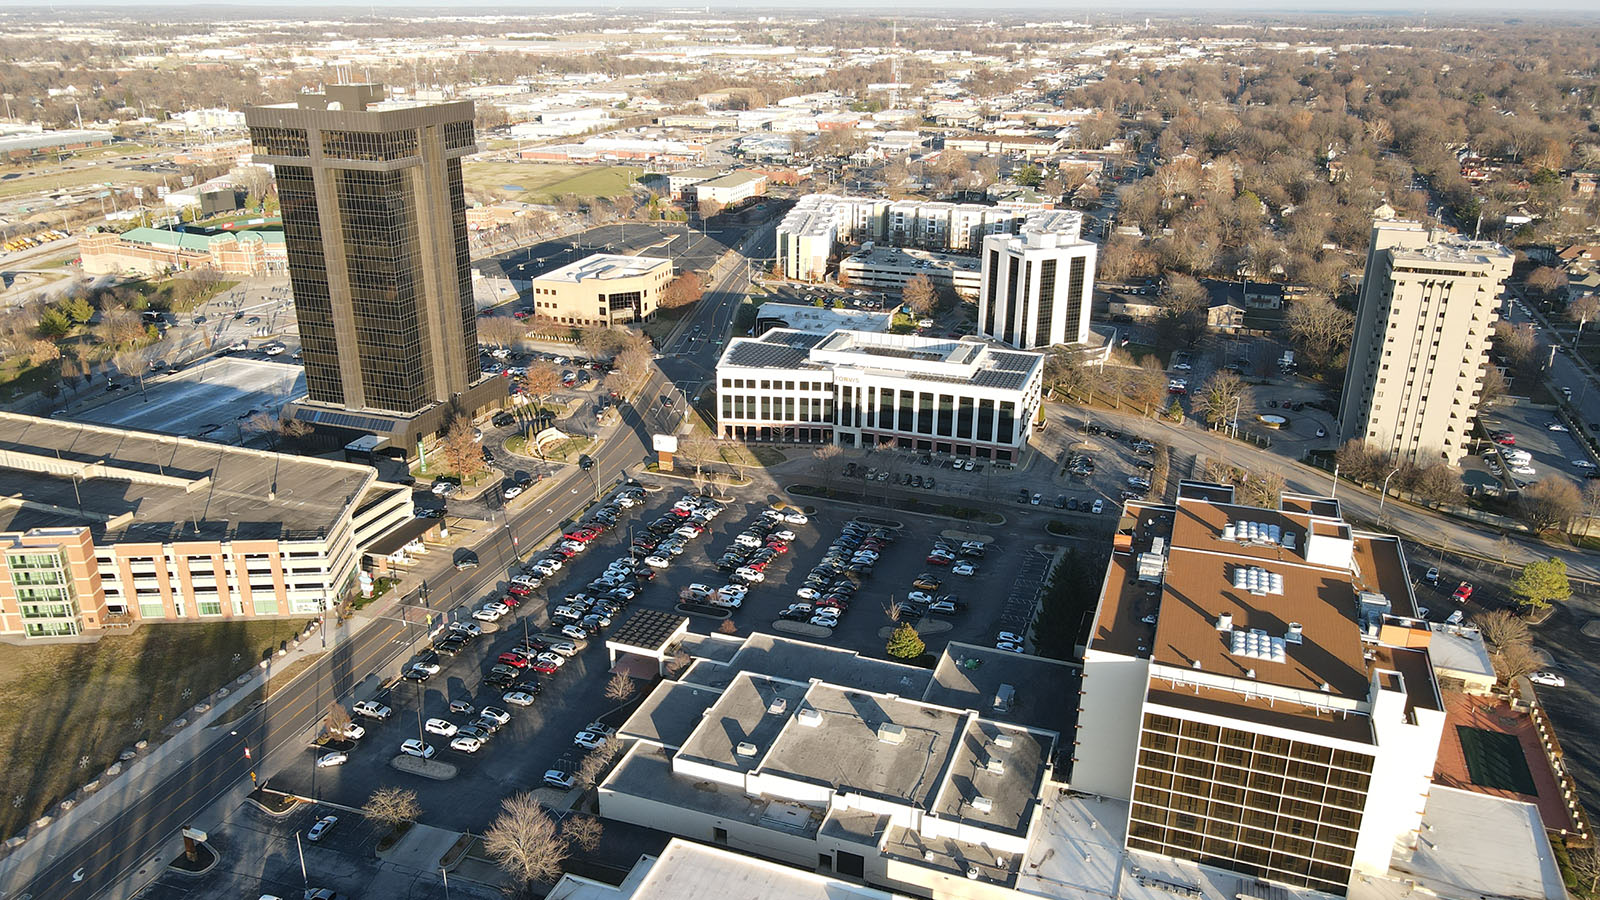 Proposed sale of Hammons Tower, parking garage could spur investment in downtown Springfield